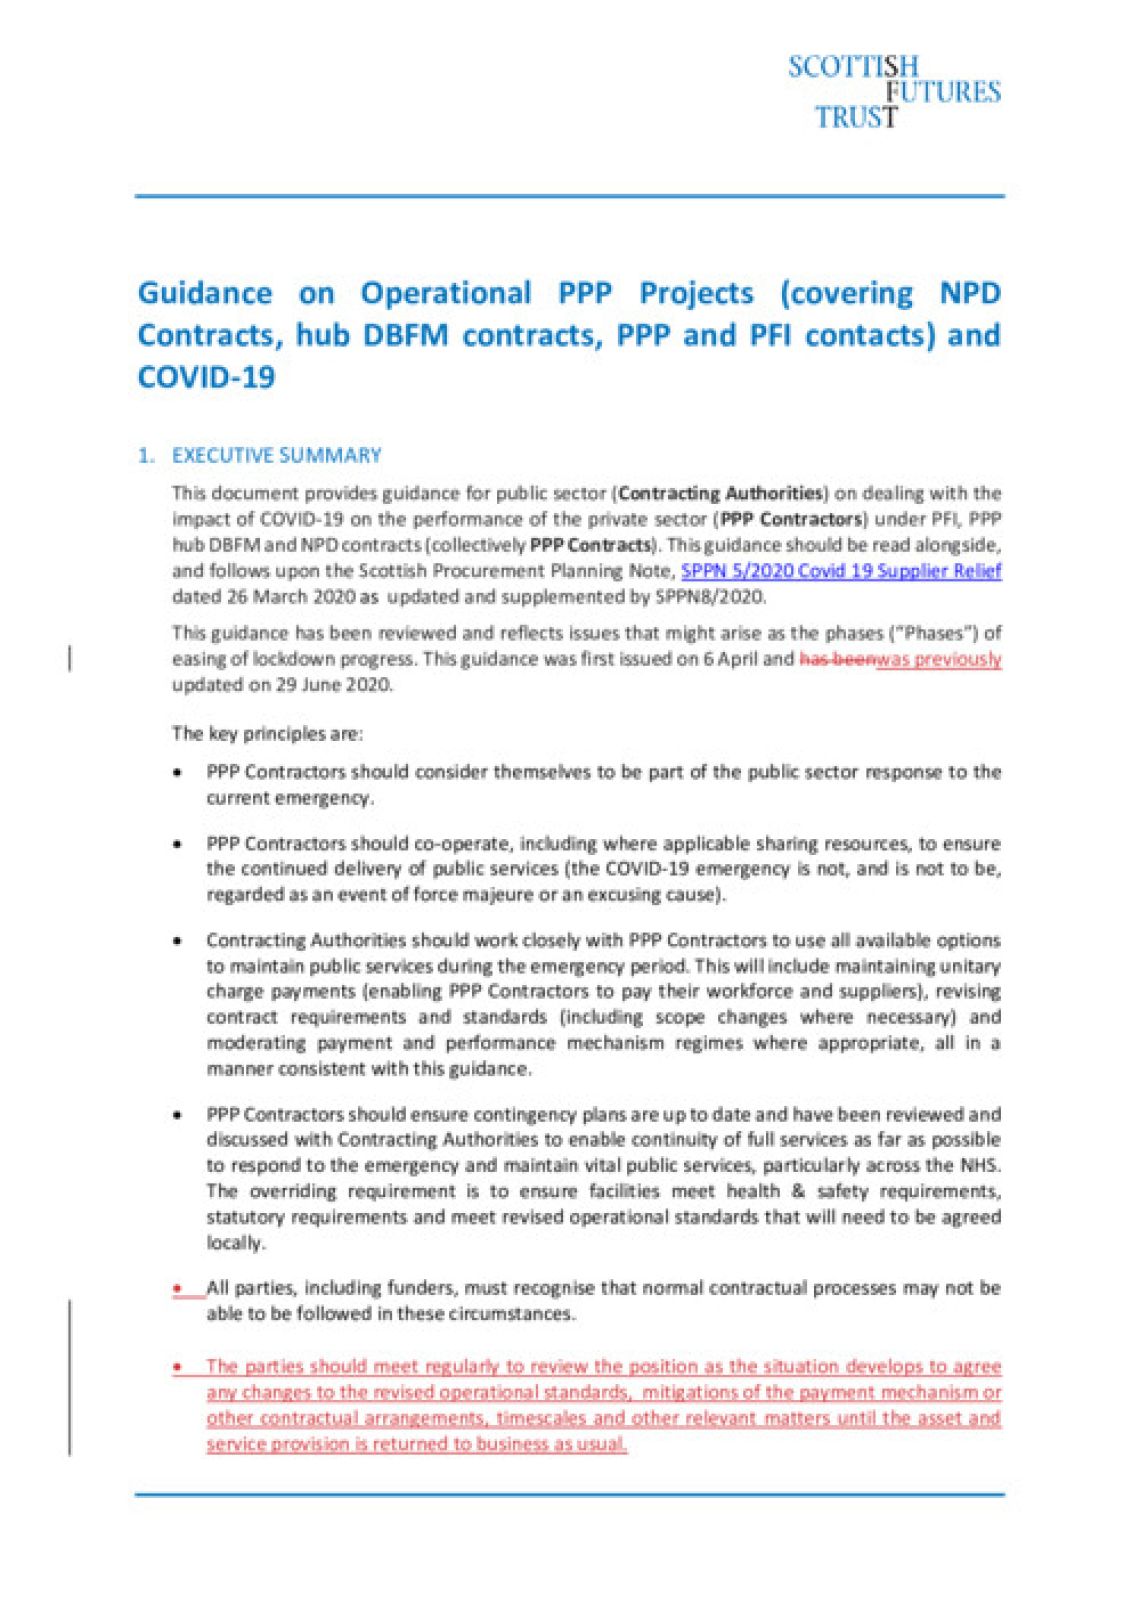 Guidance on Operational PPP Projects (Comparison Sept 2020 - to June 2020) cover